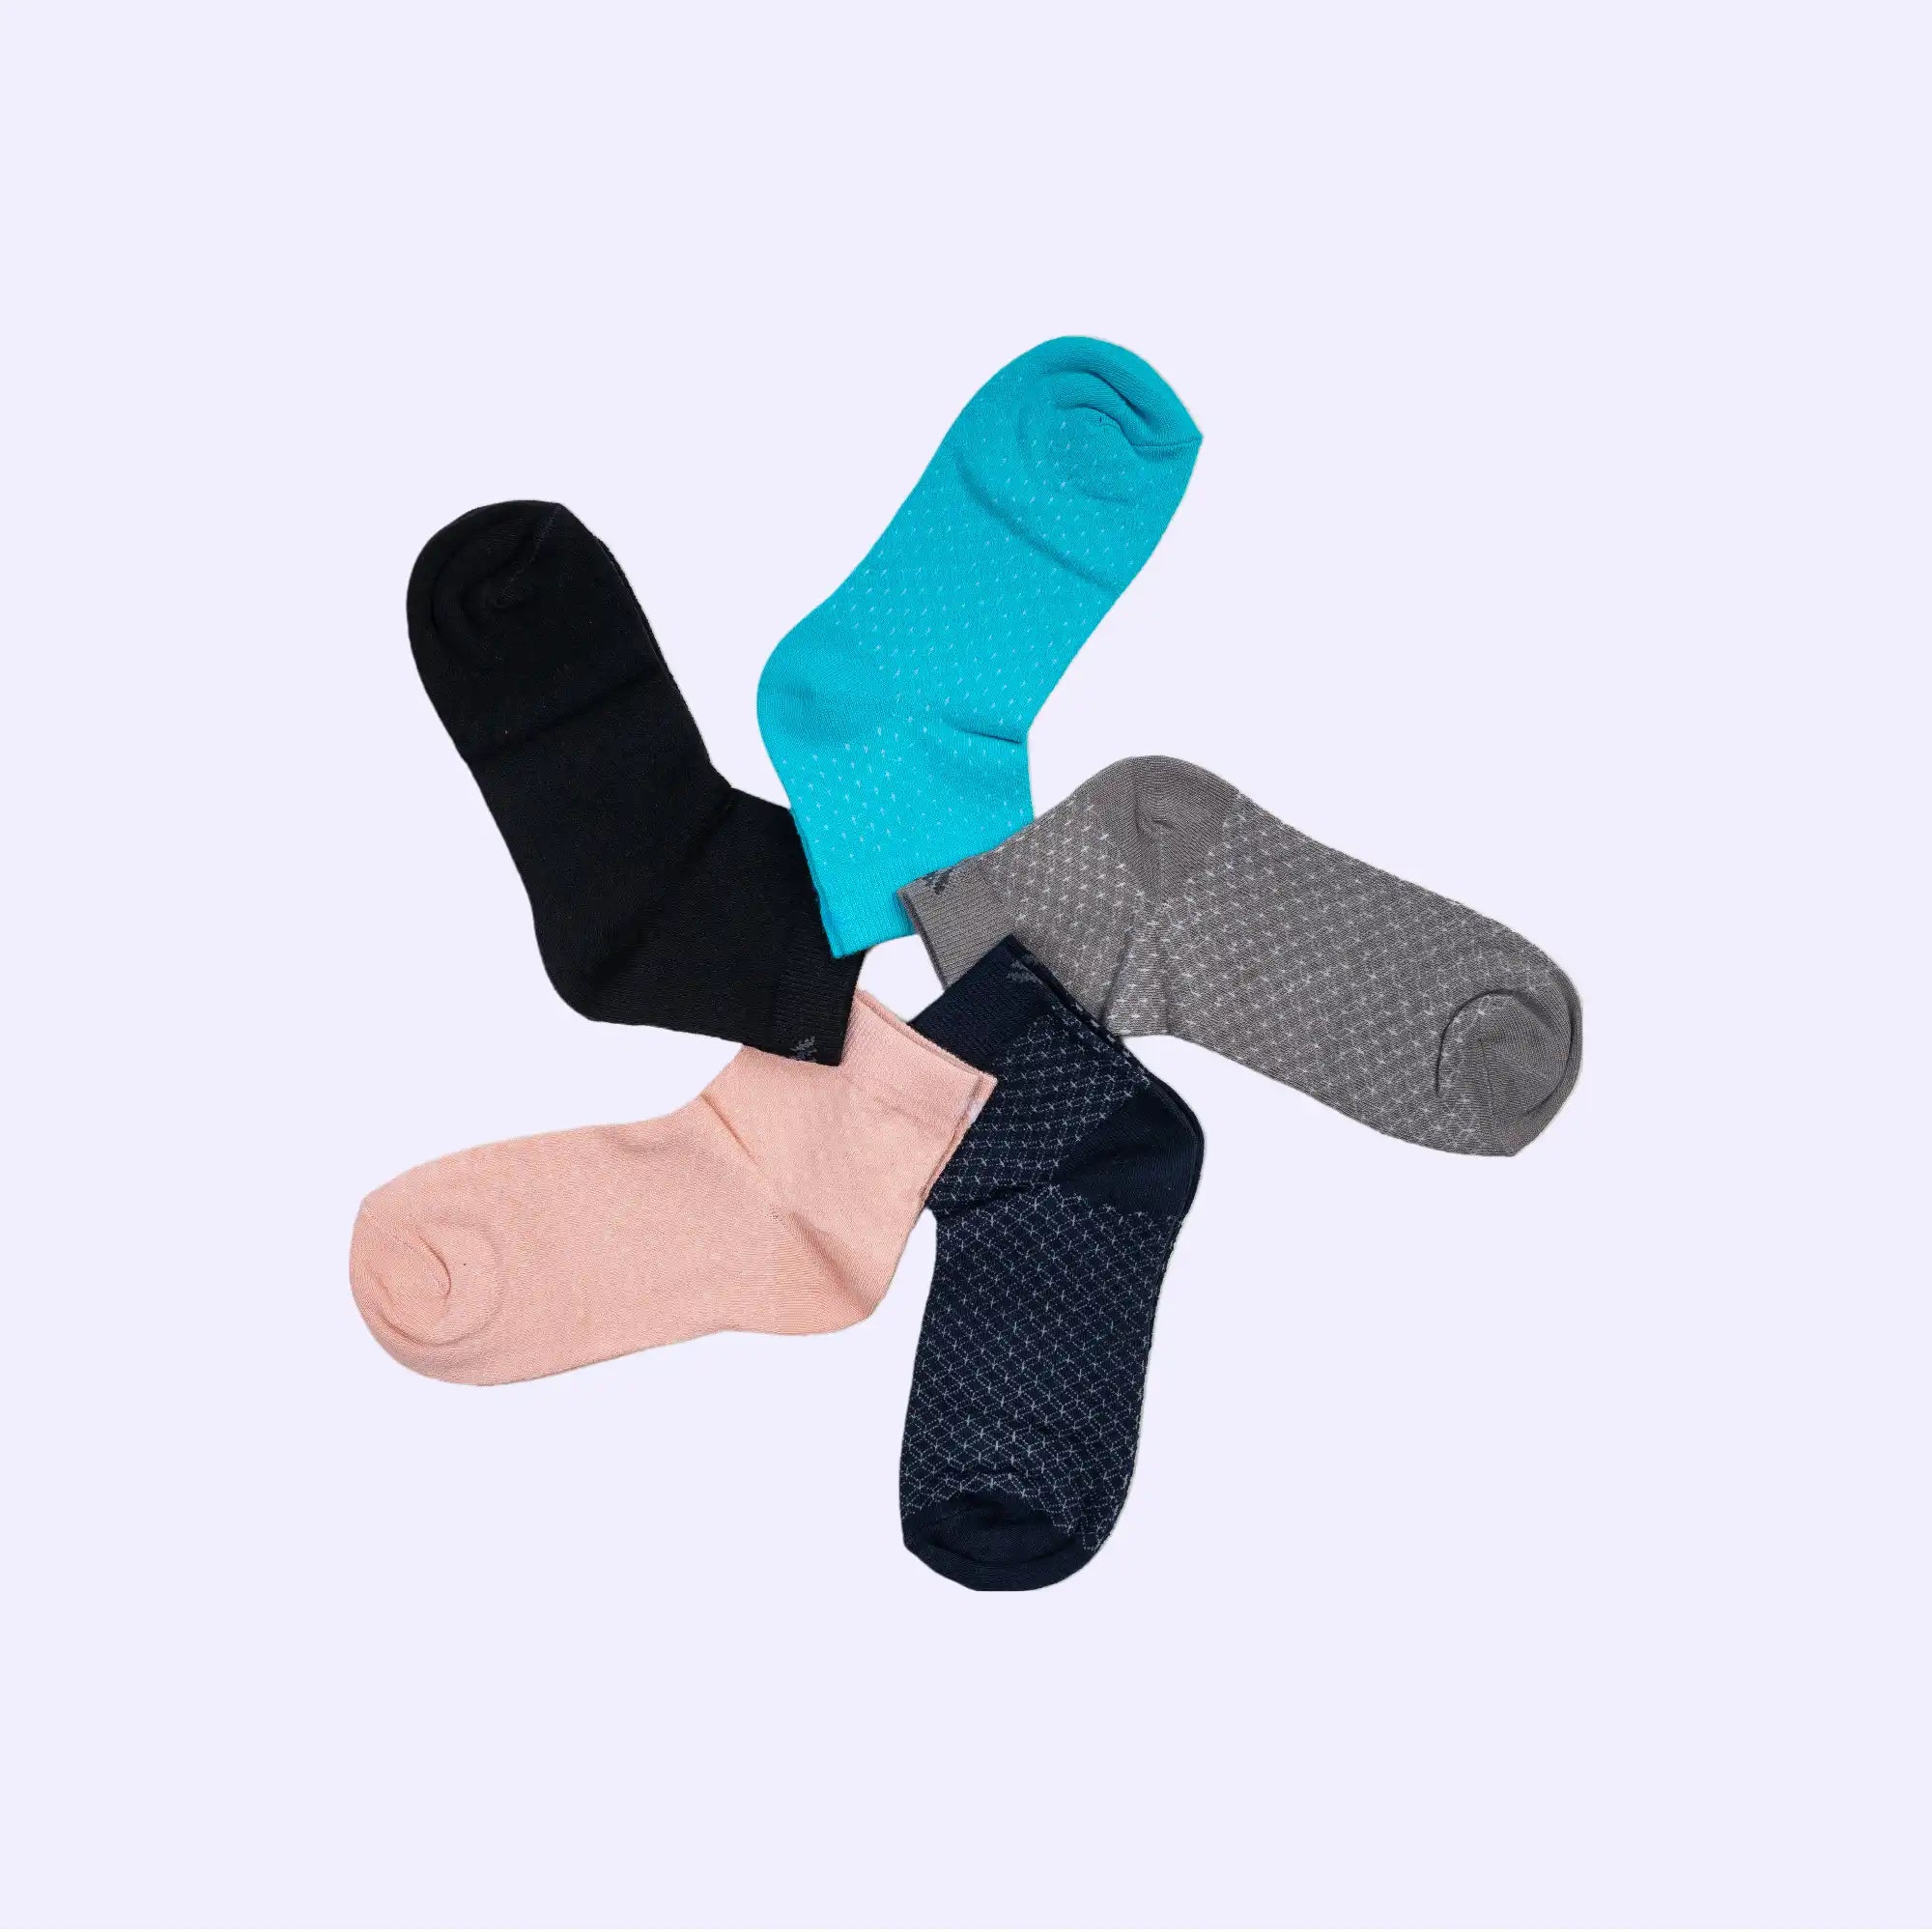 Young Wings Women's Multi Colour Cotton Fabric Solid Ankle Length Socks - Pack of 5, Style no. 5117-W1